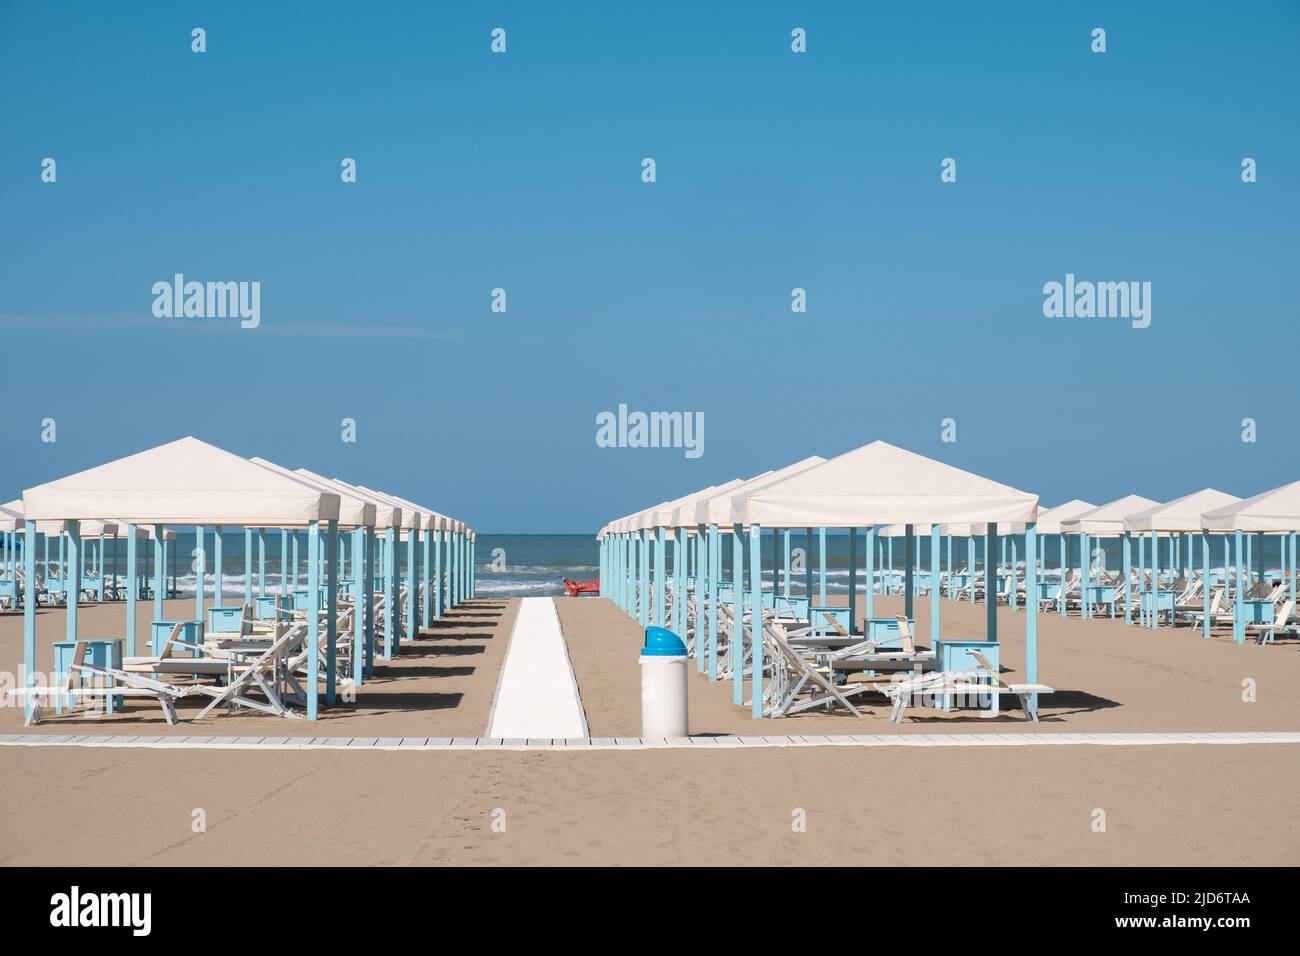 Blue and white beach cabanas lined up and ready for the day's beachgoers in Viareggio, Italy. Stock Photo